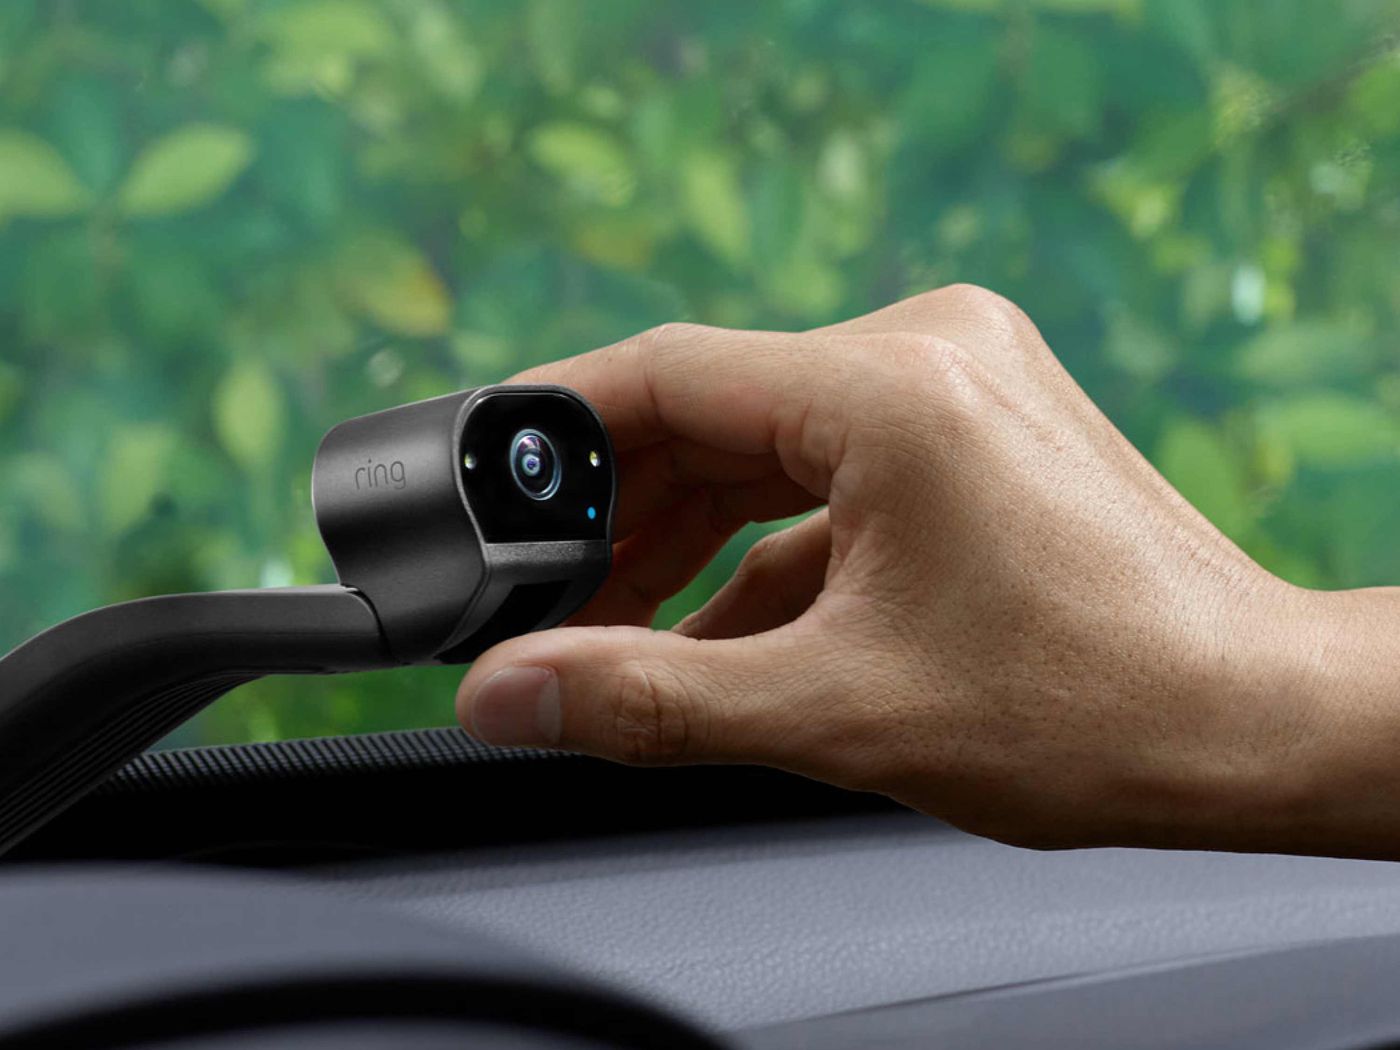 Ring's in-car security camera makes its official debut.